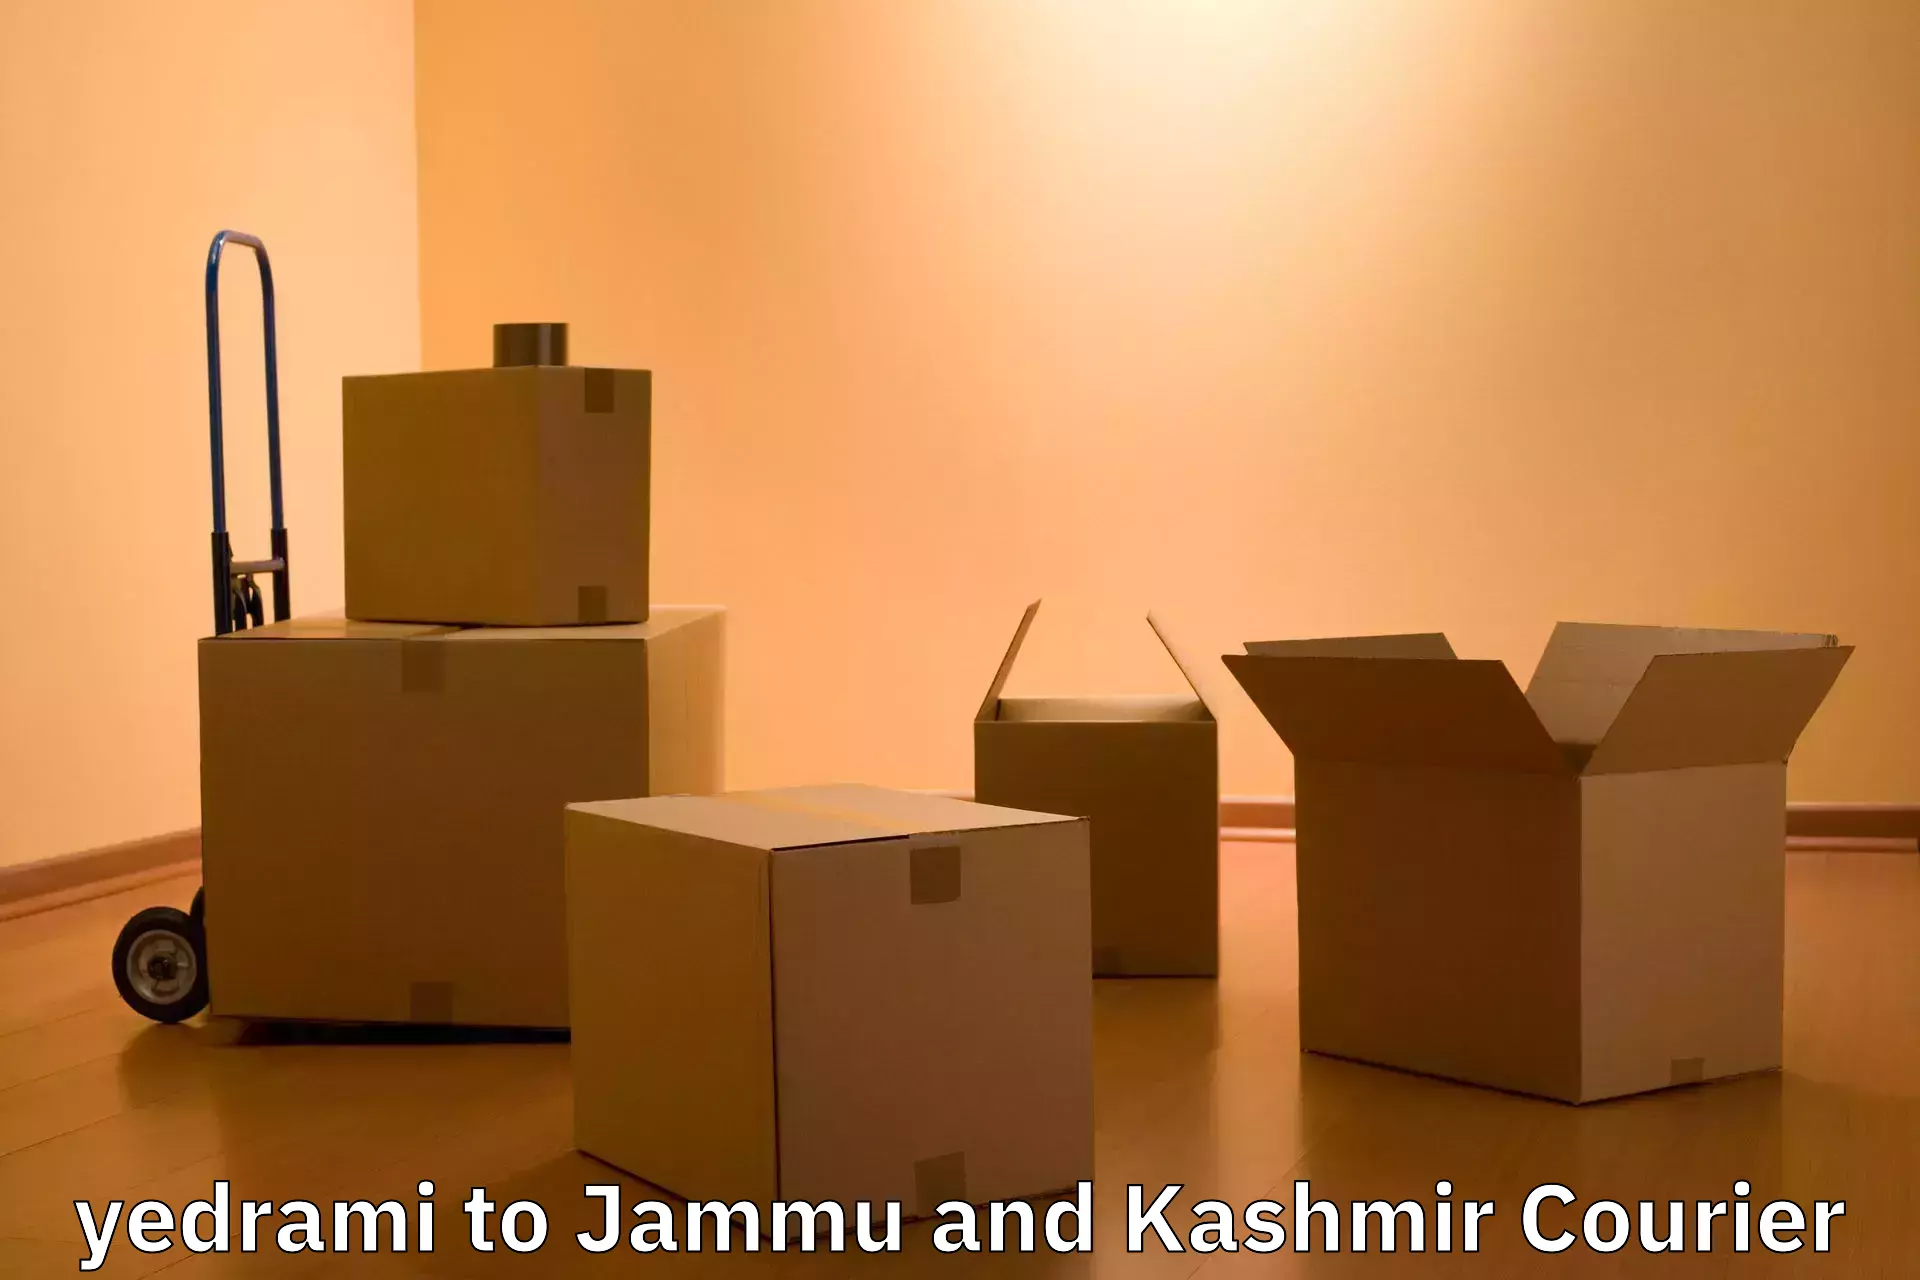 Instant baggage transport quote yedrami to Jammu and Kashmir